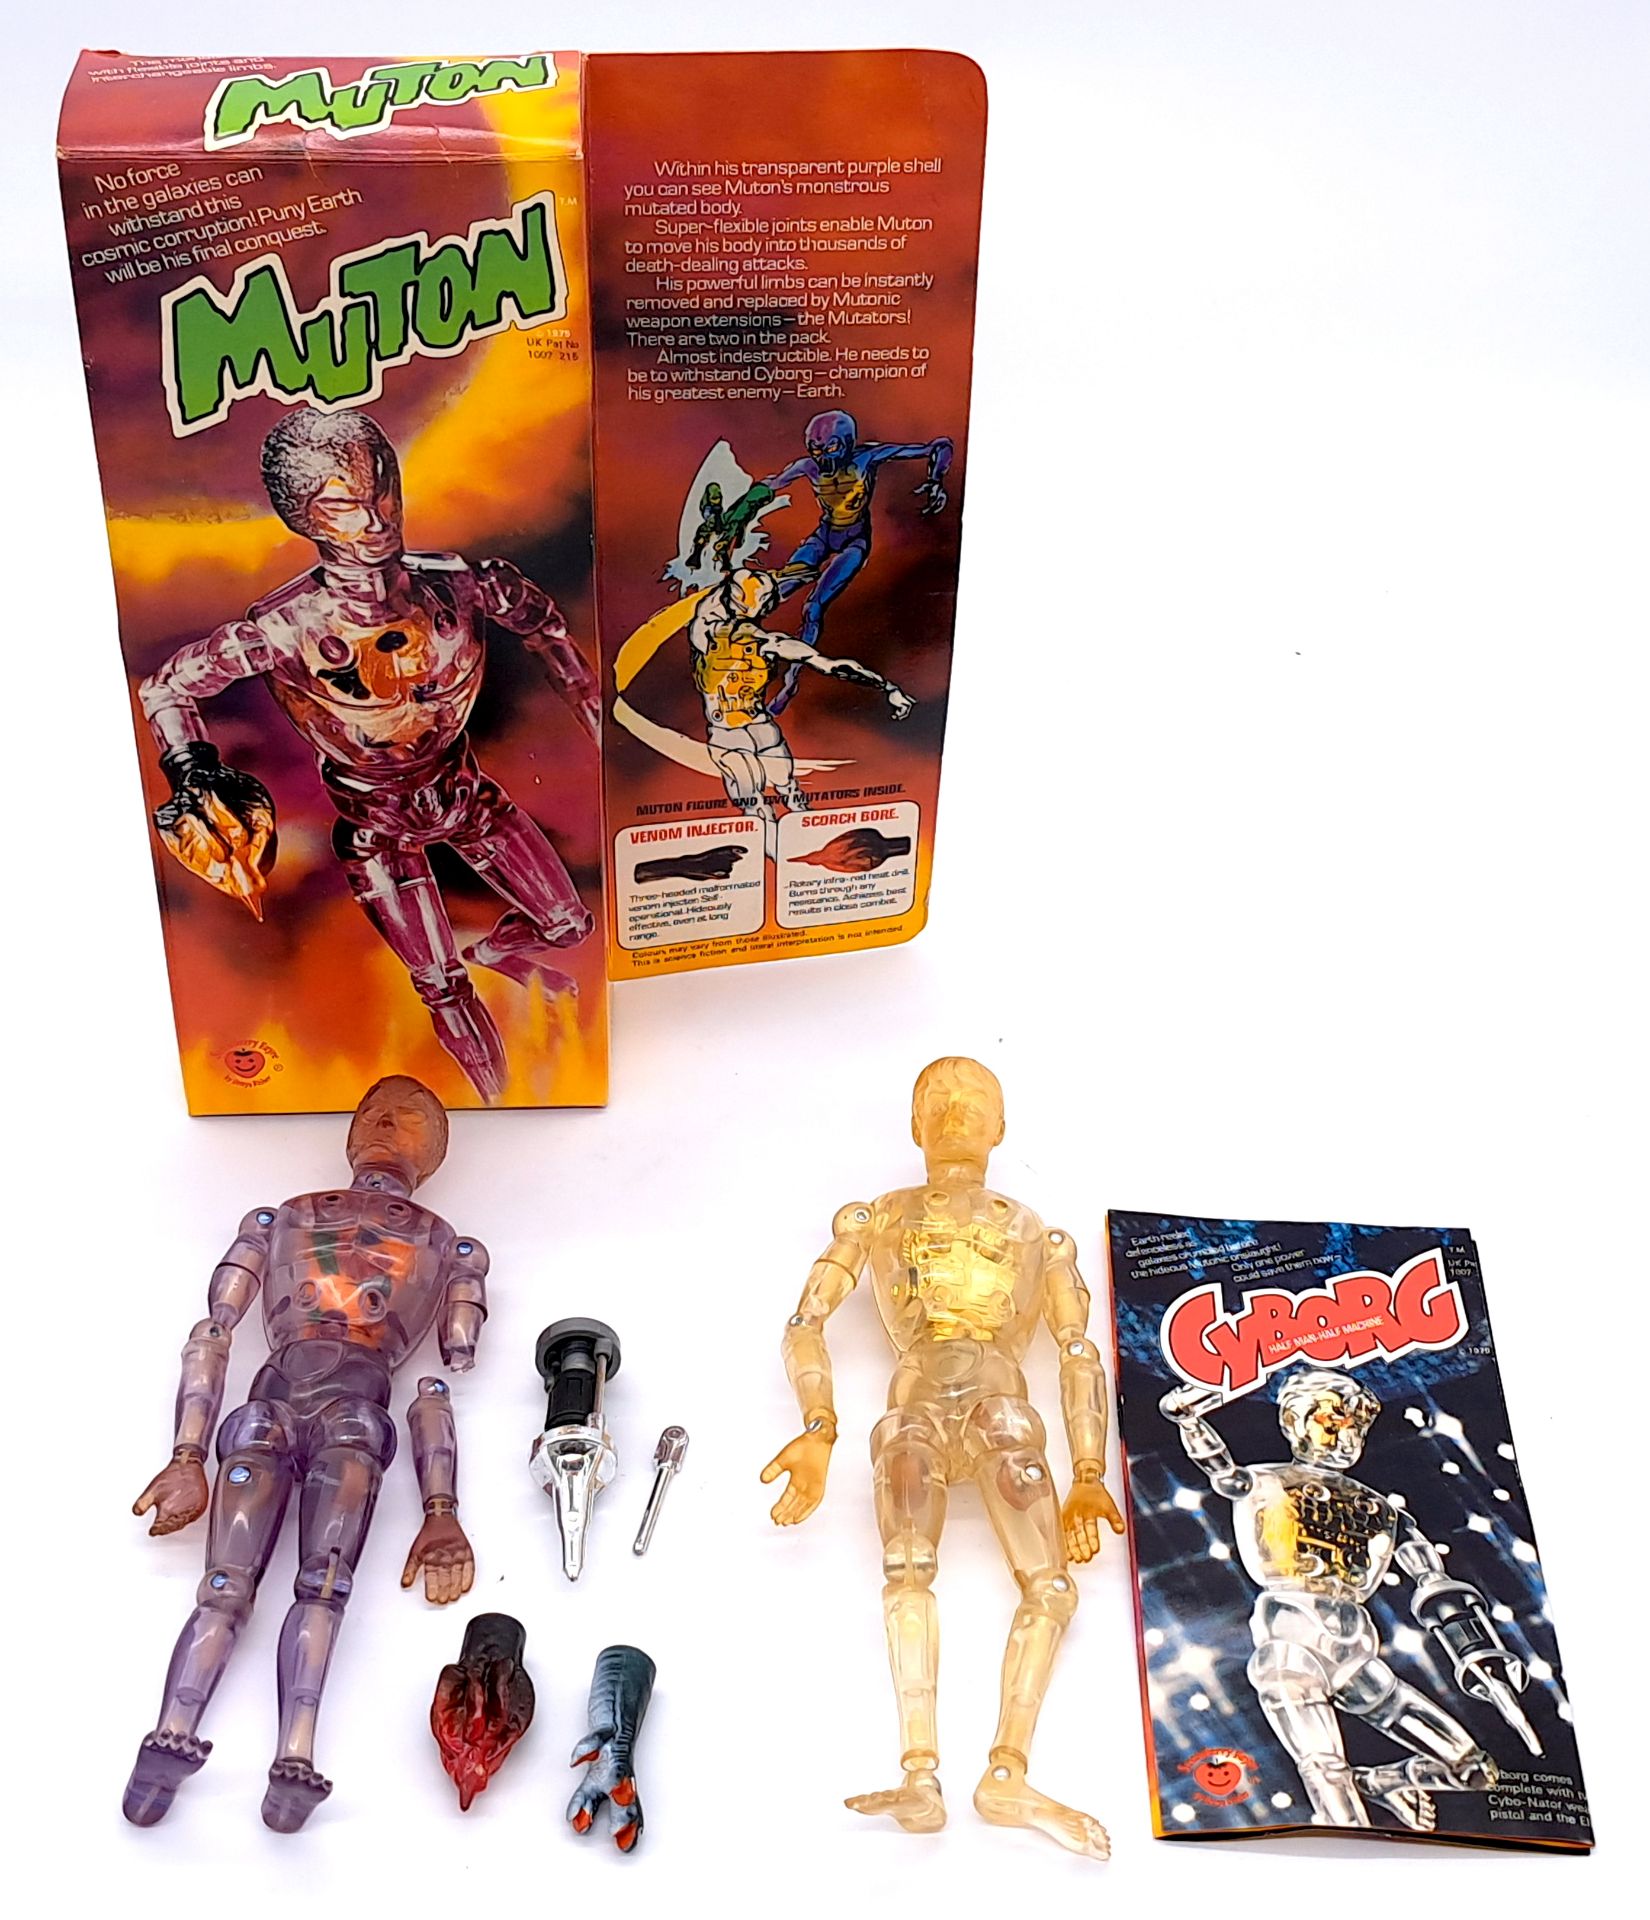 Denys Fisher, Strawberry Fayre boxed Muton & loose cyborg figures